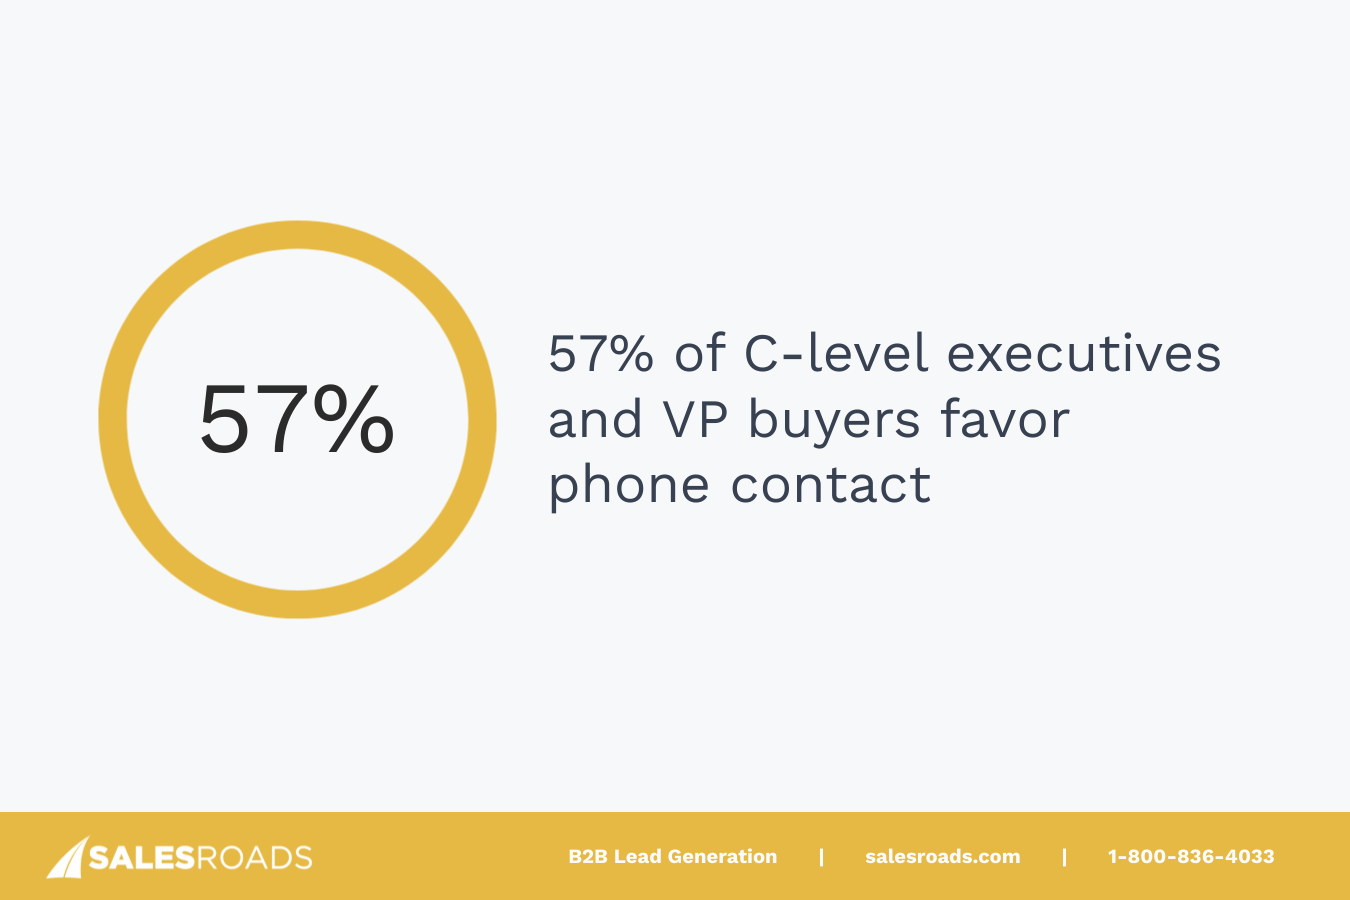 Cold Calling Strategies Article: 57% of C-level executives and VP buyers favor phone contact.